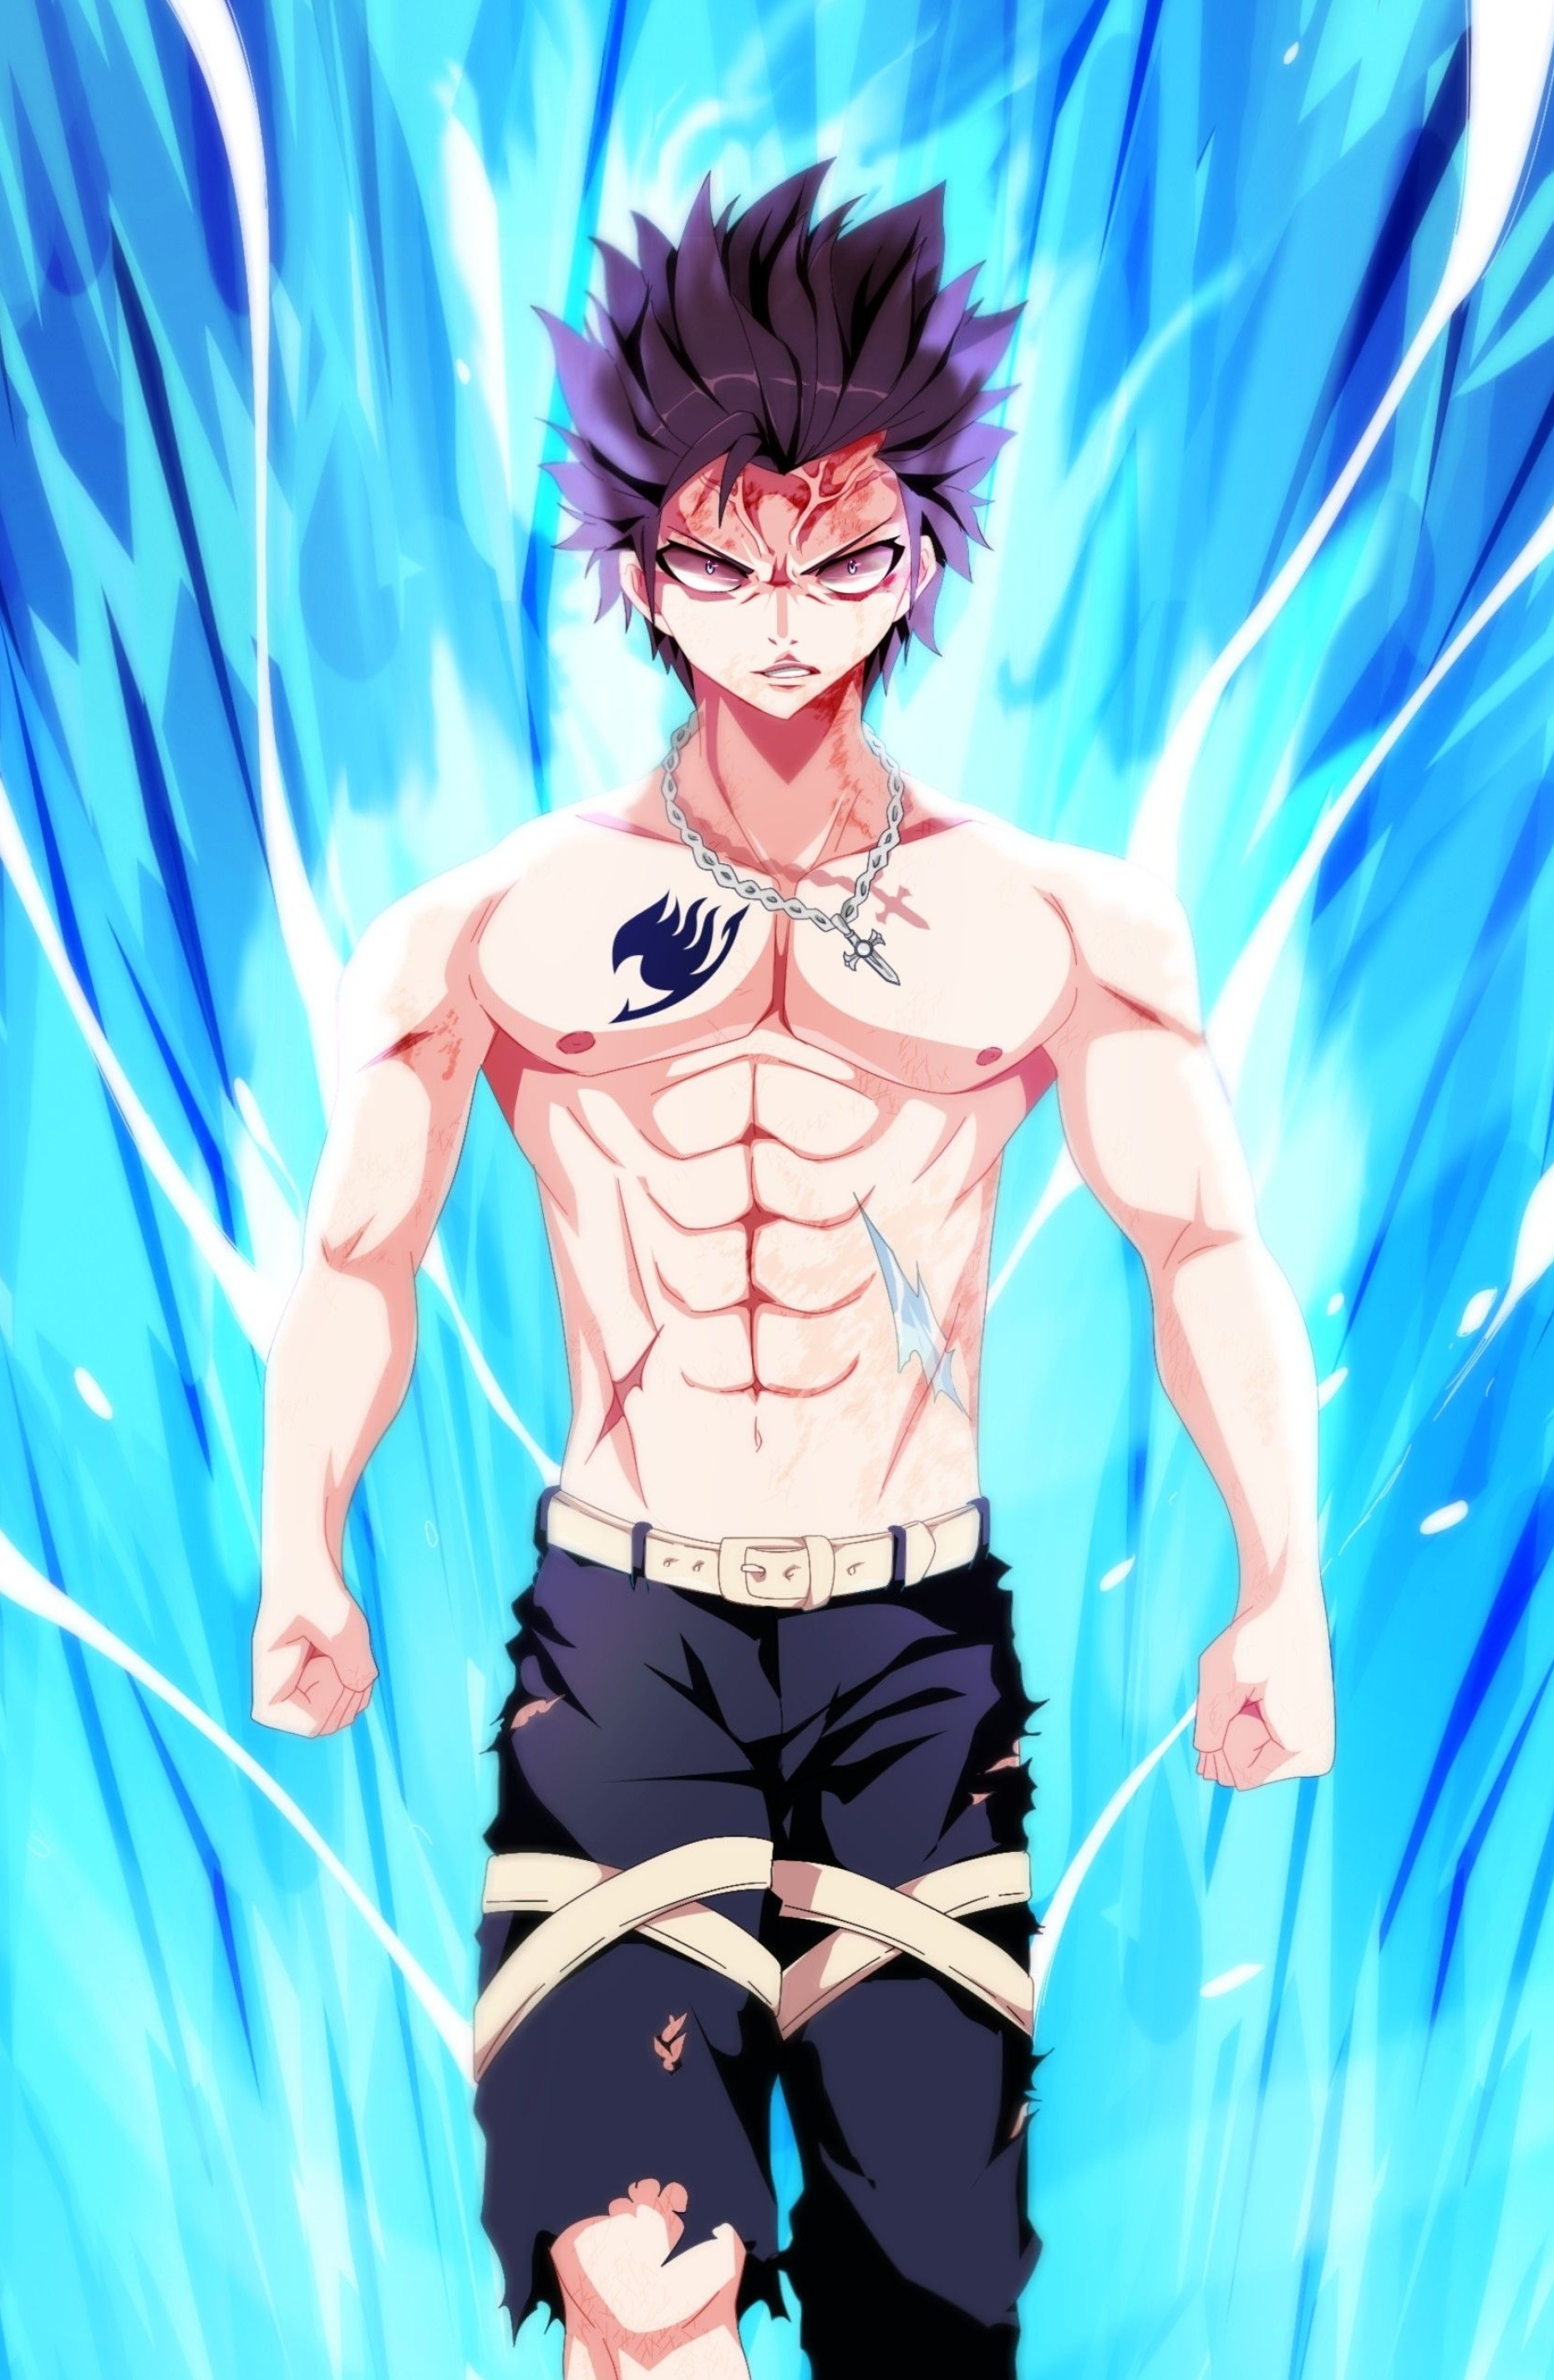 Gray Fullbuster: Static Ice-Make, Shaping ice into inanimate things or weapons, Supernatural abilities. 1860x2850 HD Wallpaper.